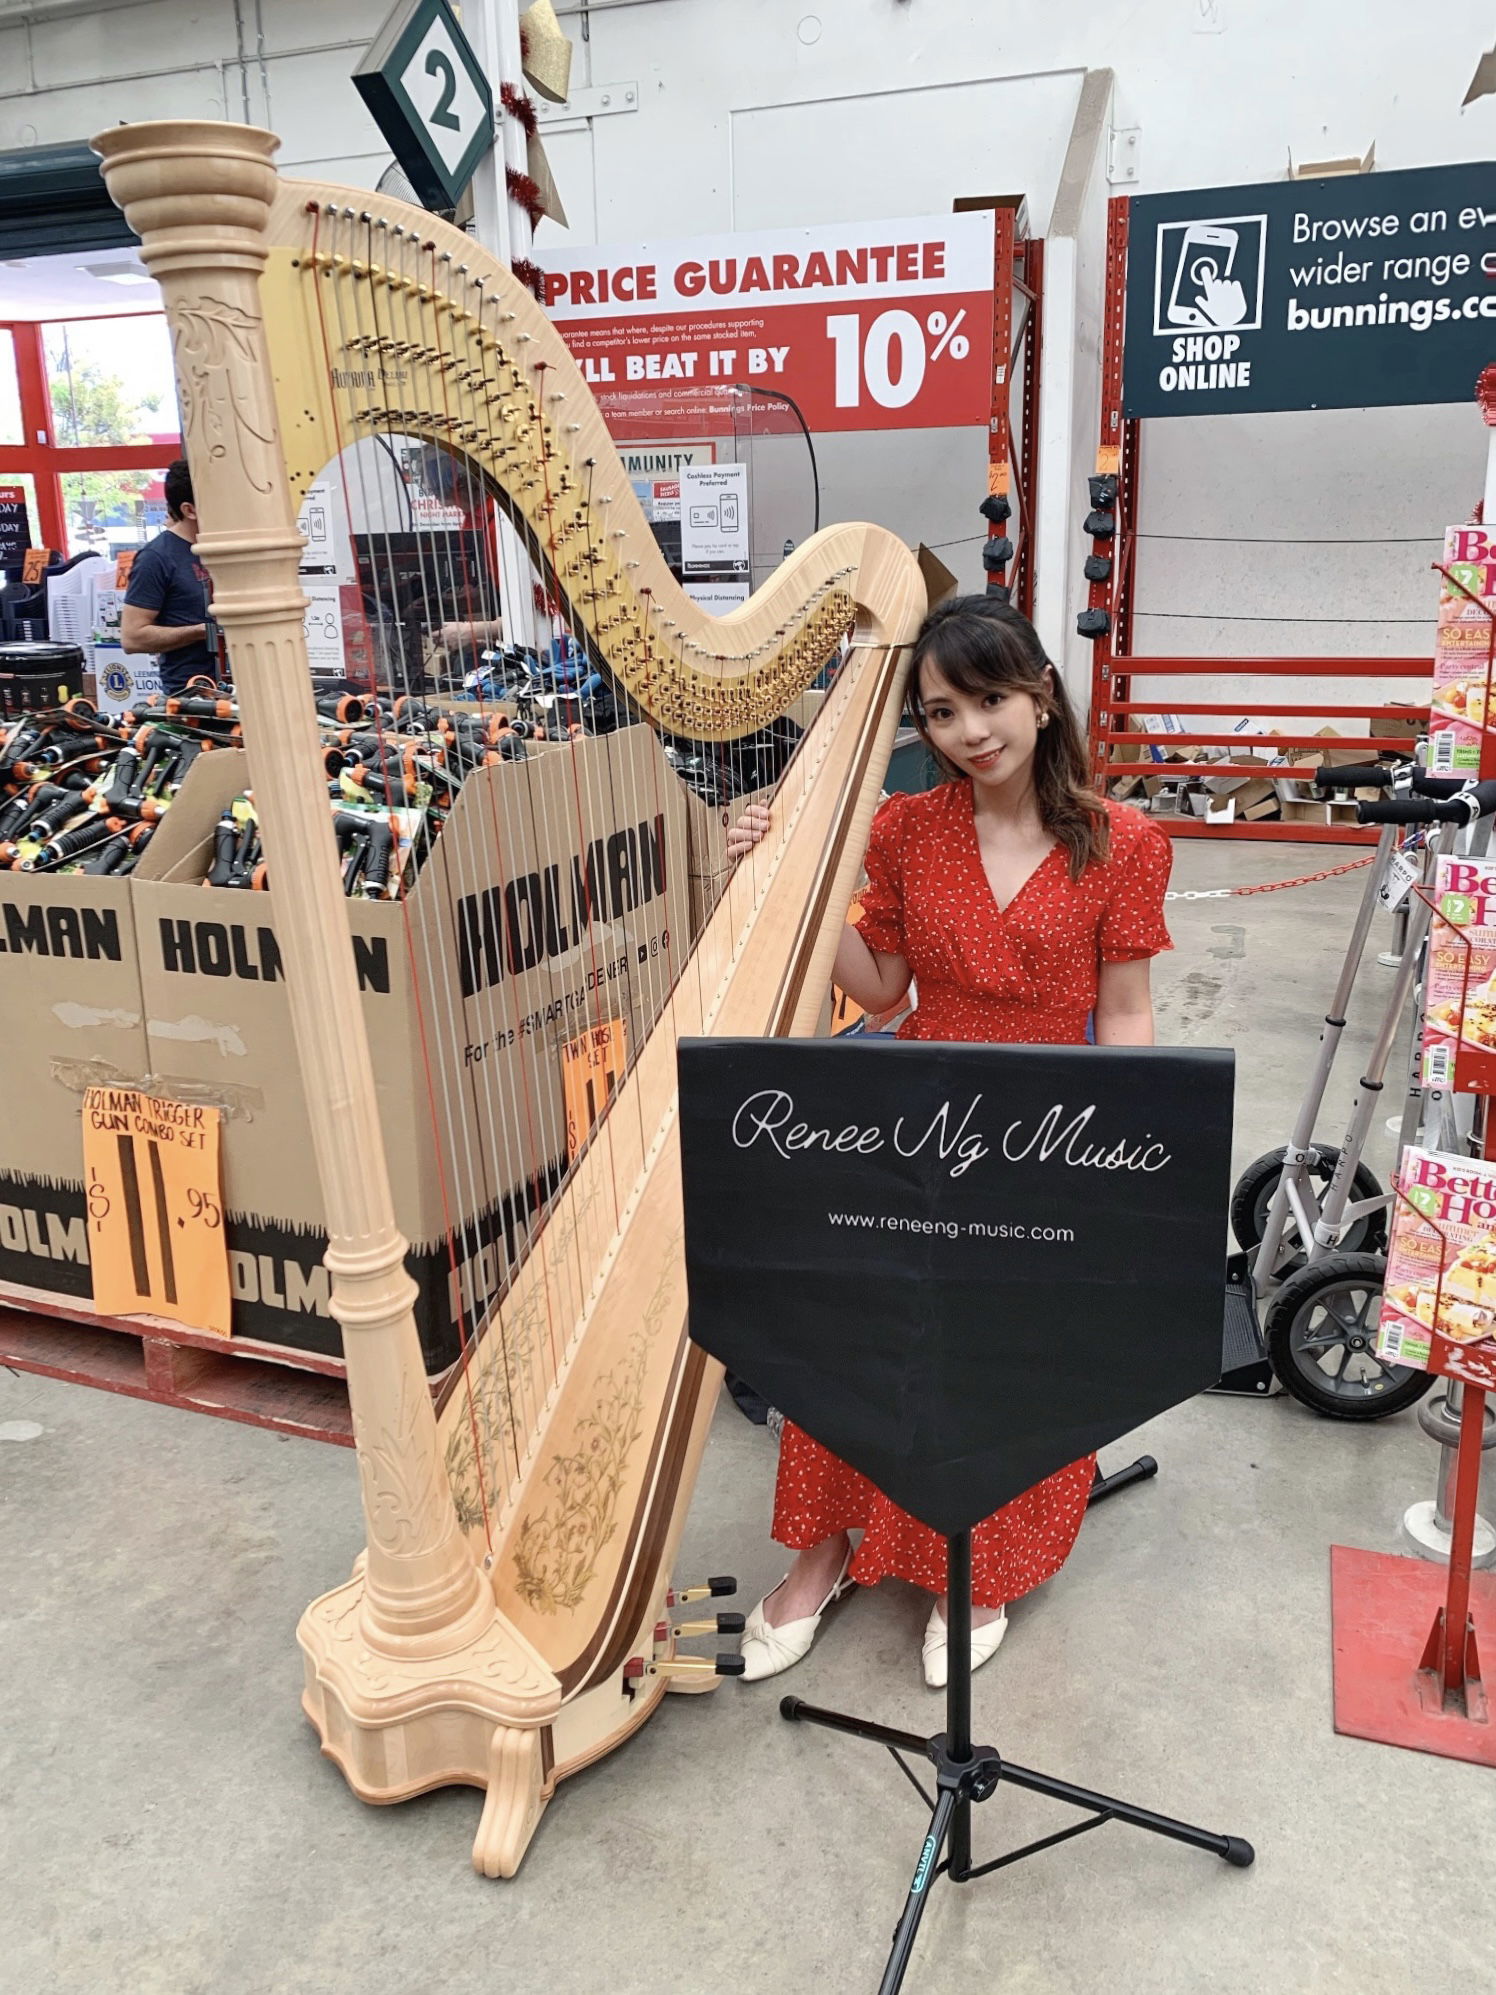 Harp playing at Bunnings for Christmas event Dec 2022